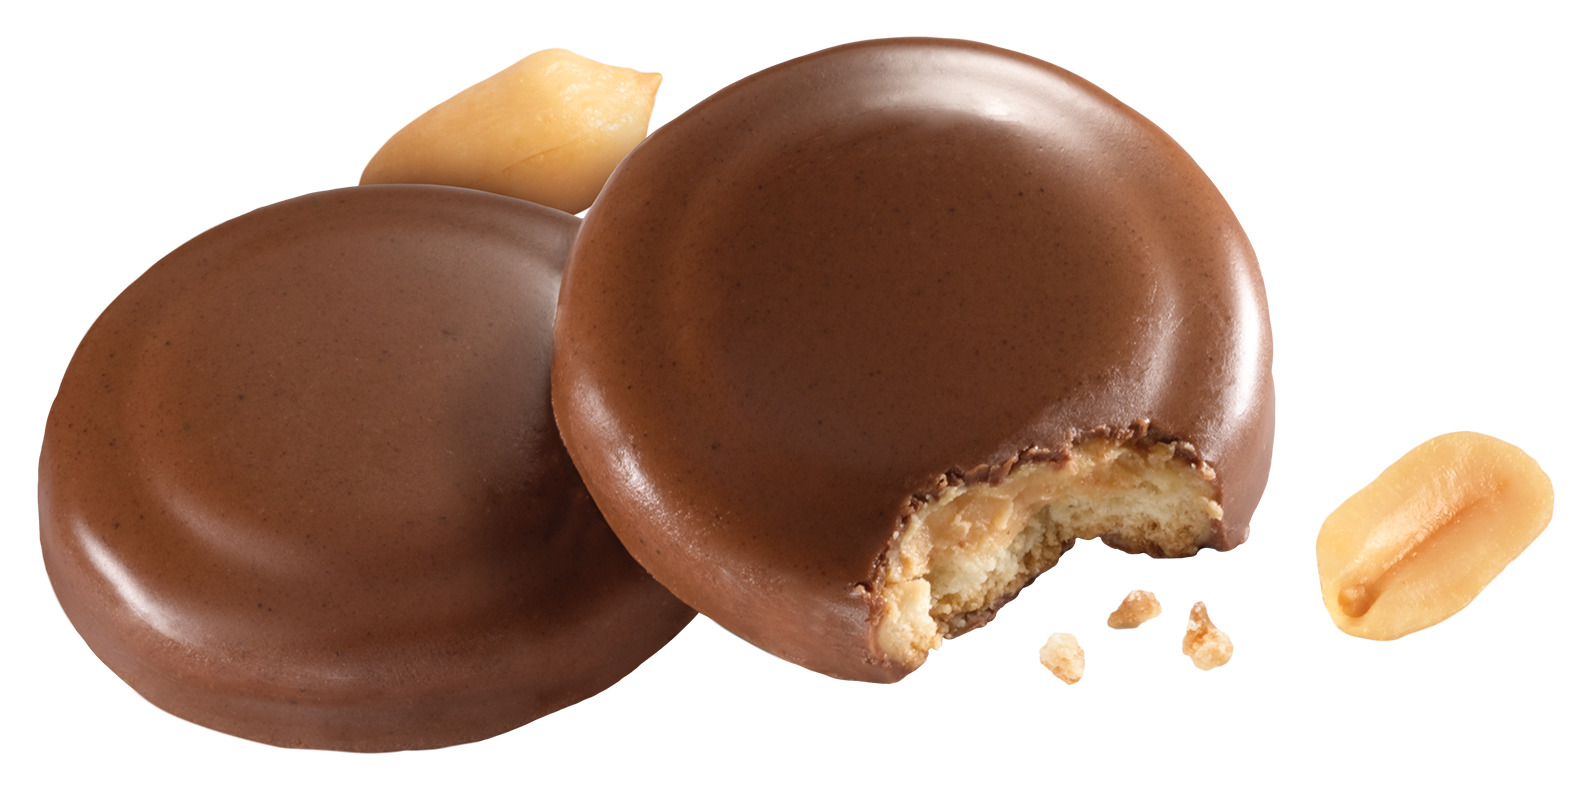 Tagalongs® | Crispy cookies layered with peanut butter and covered with a chocolaty coating